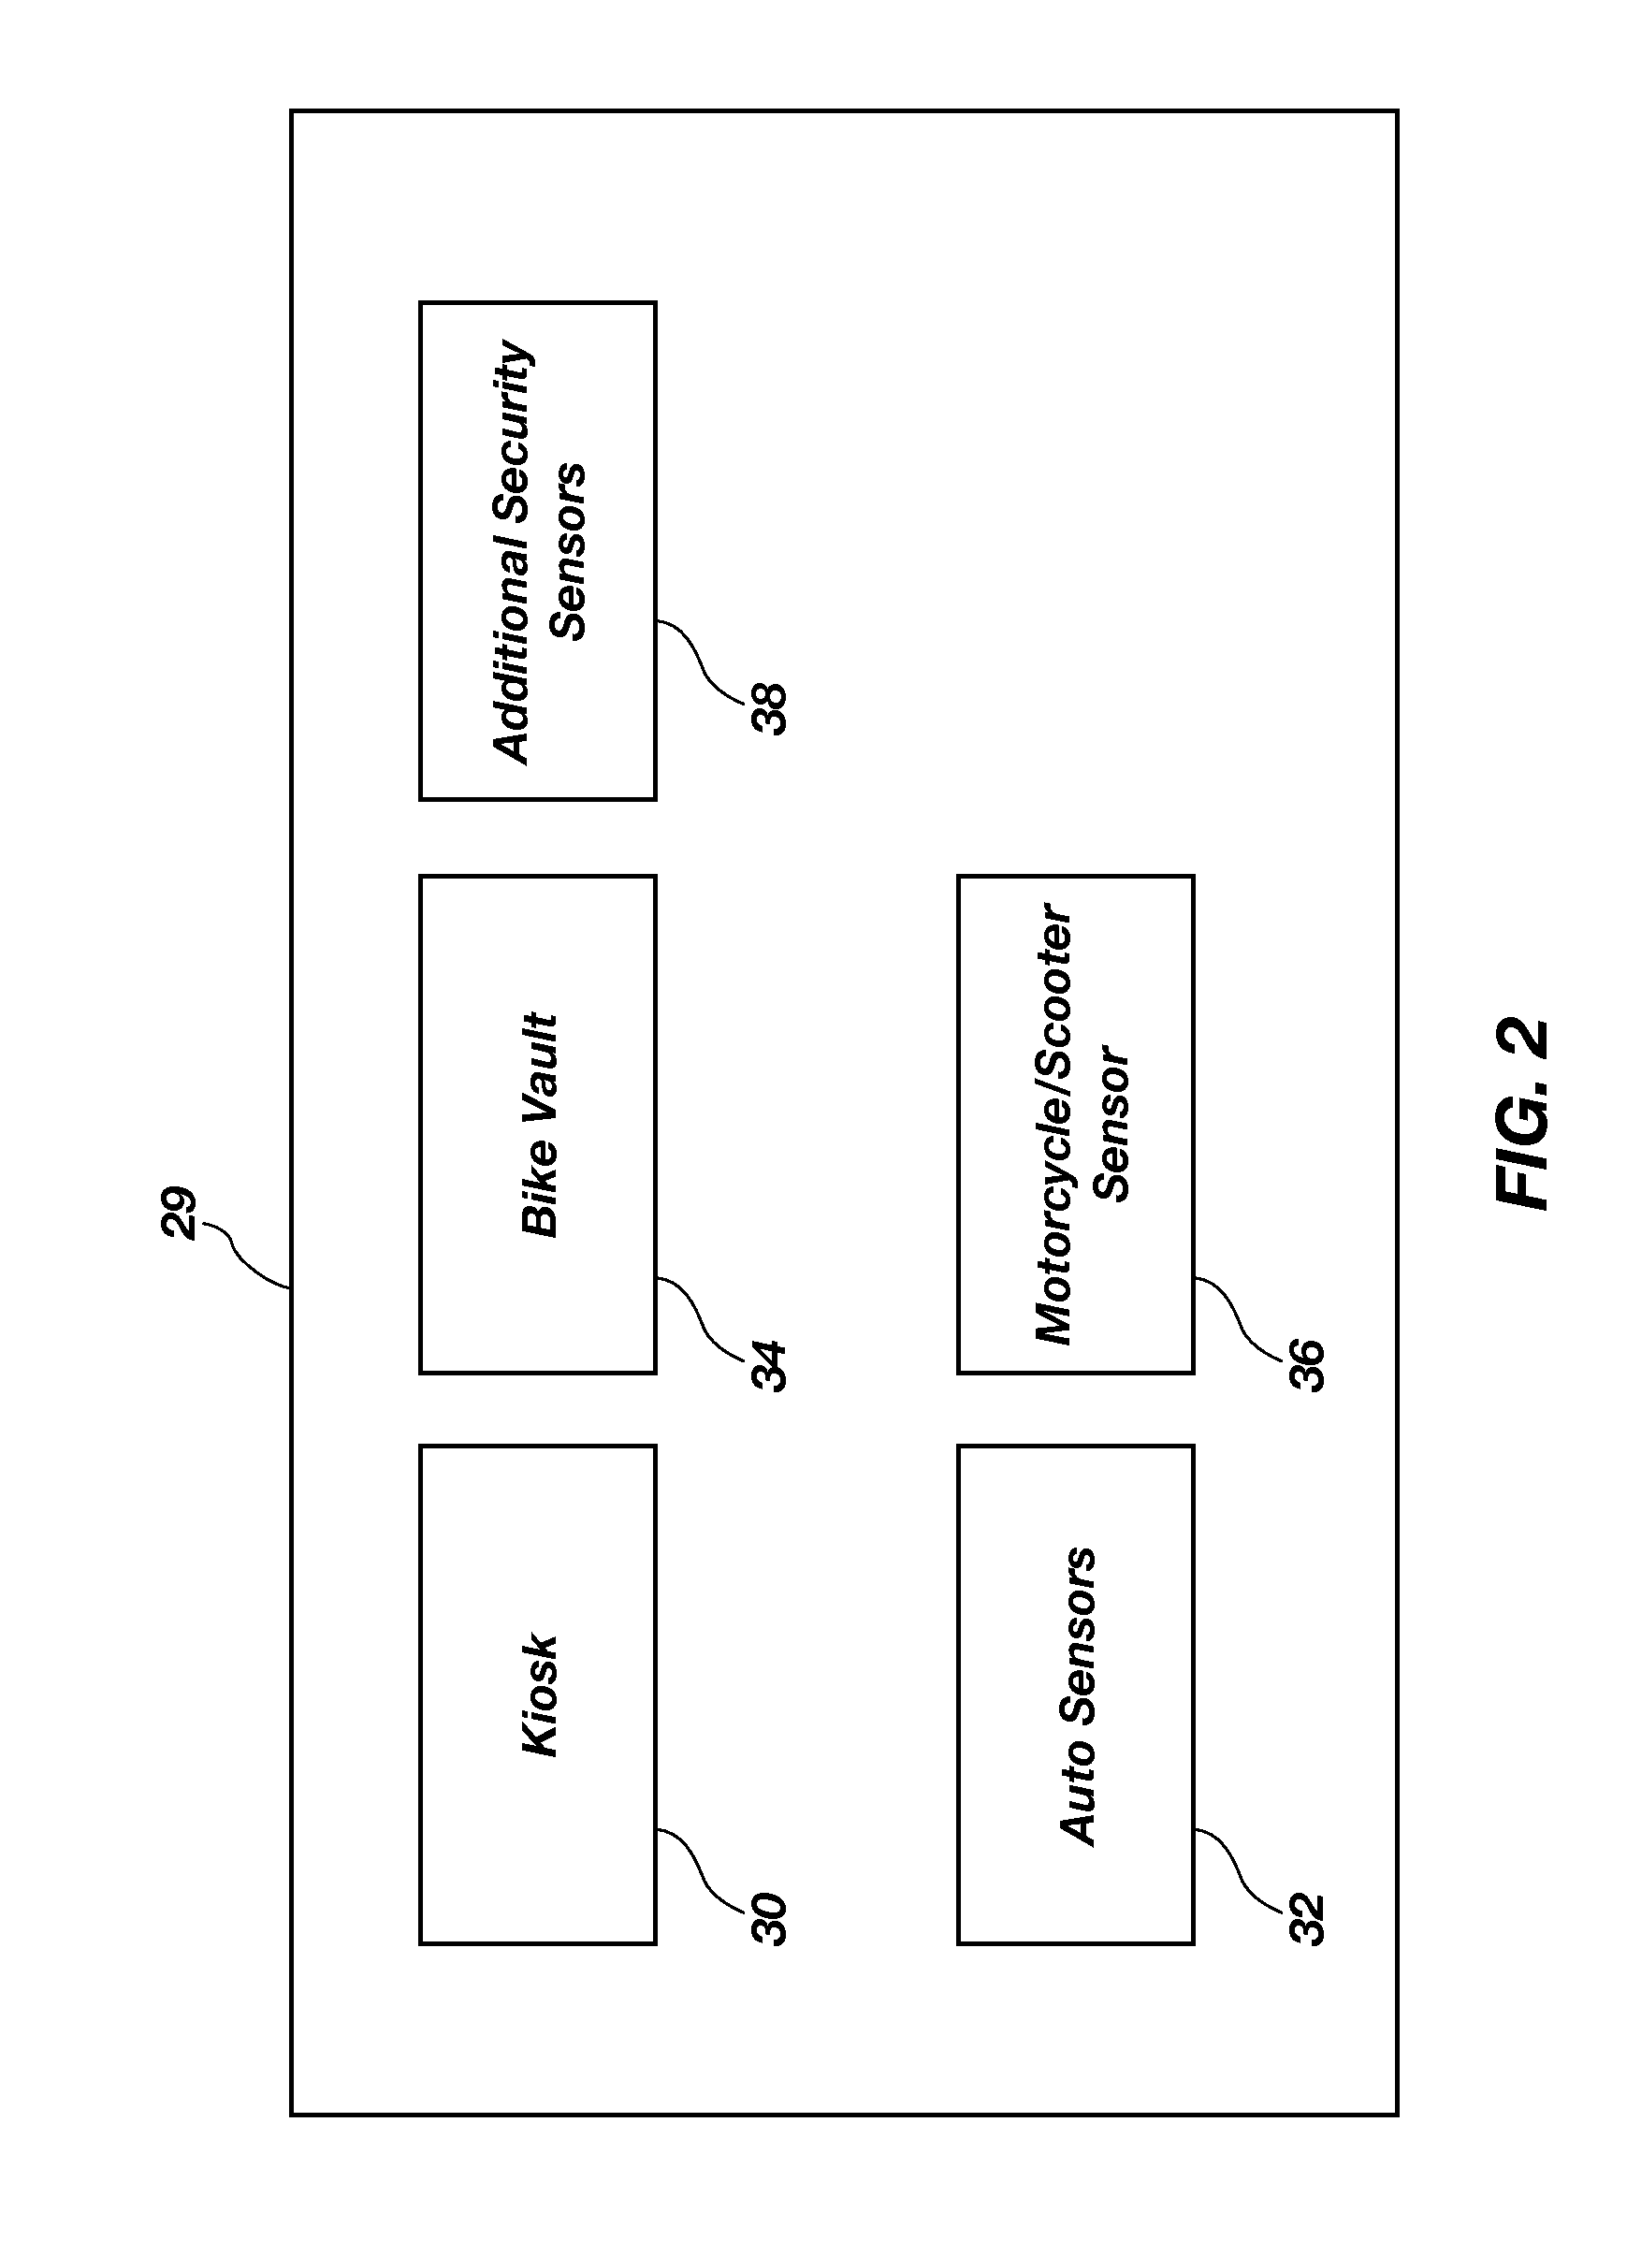 Parking system and methods of use and doing business